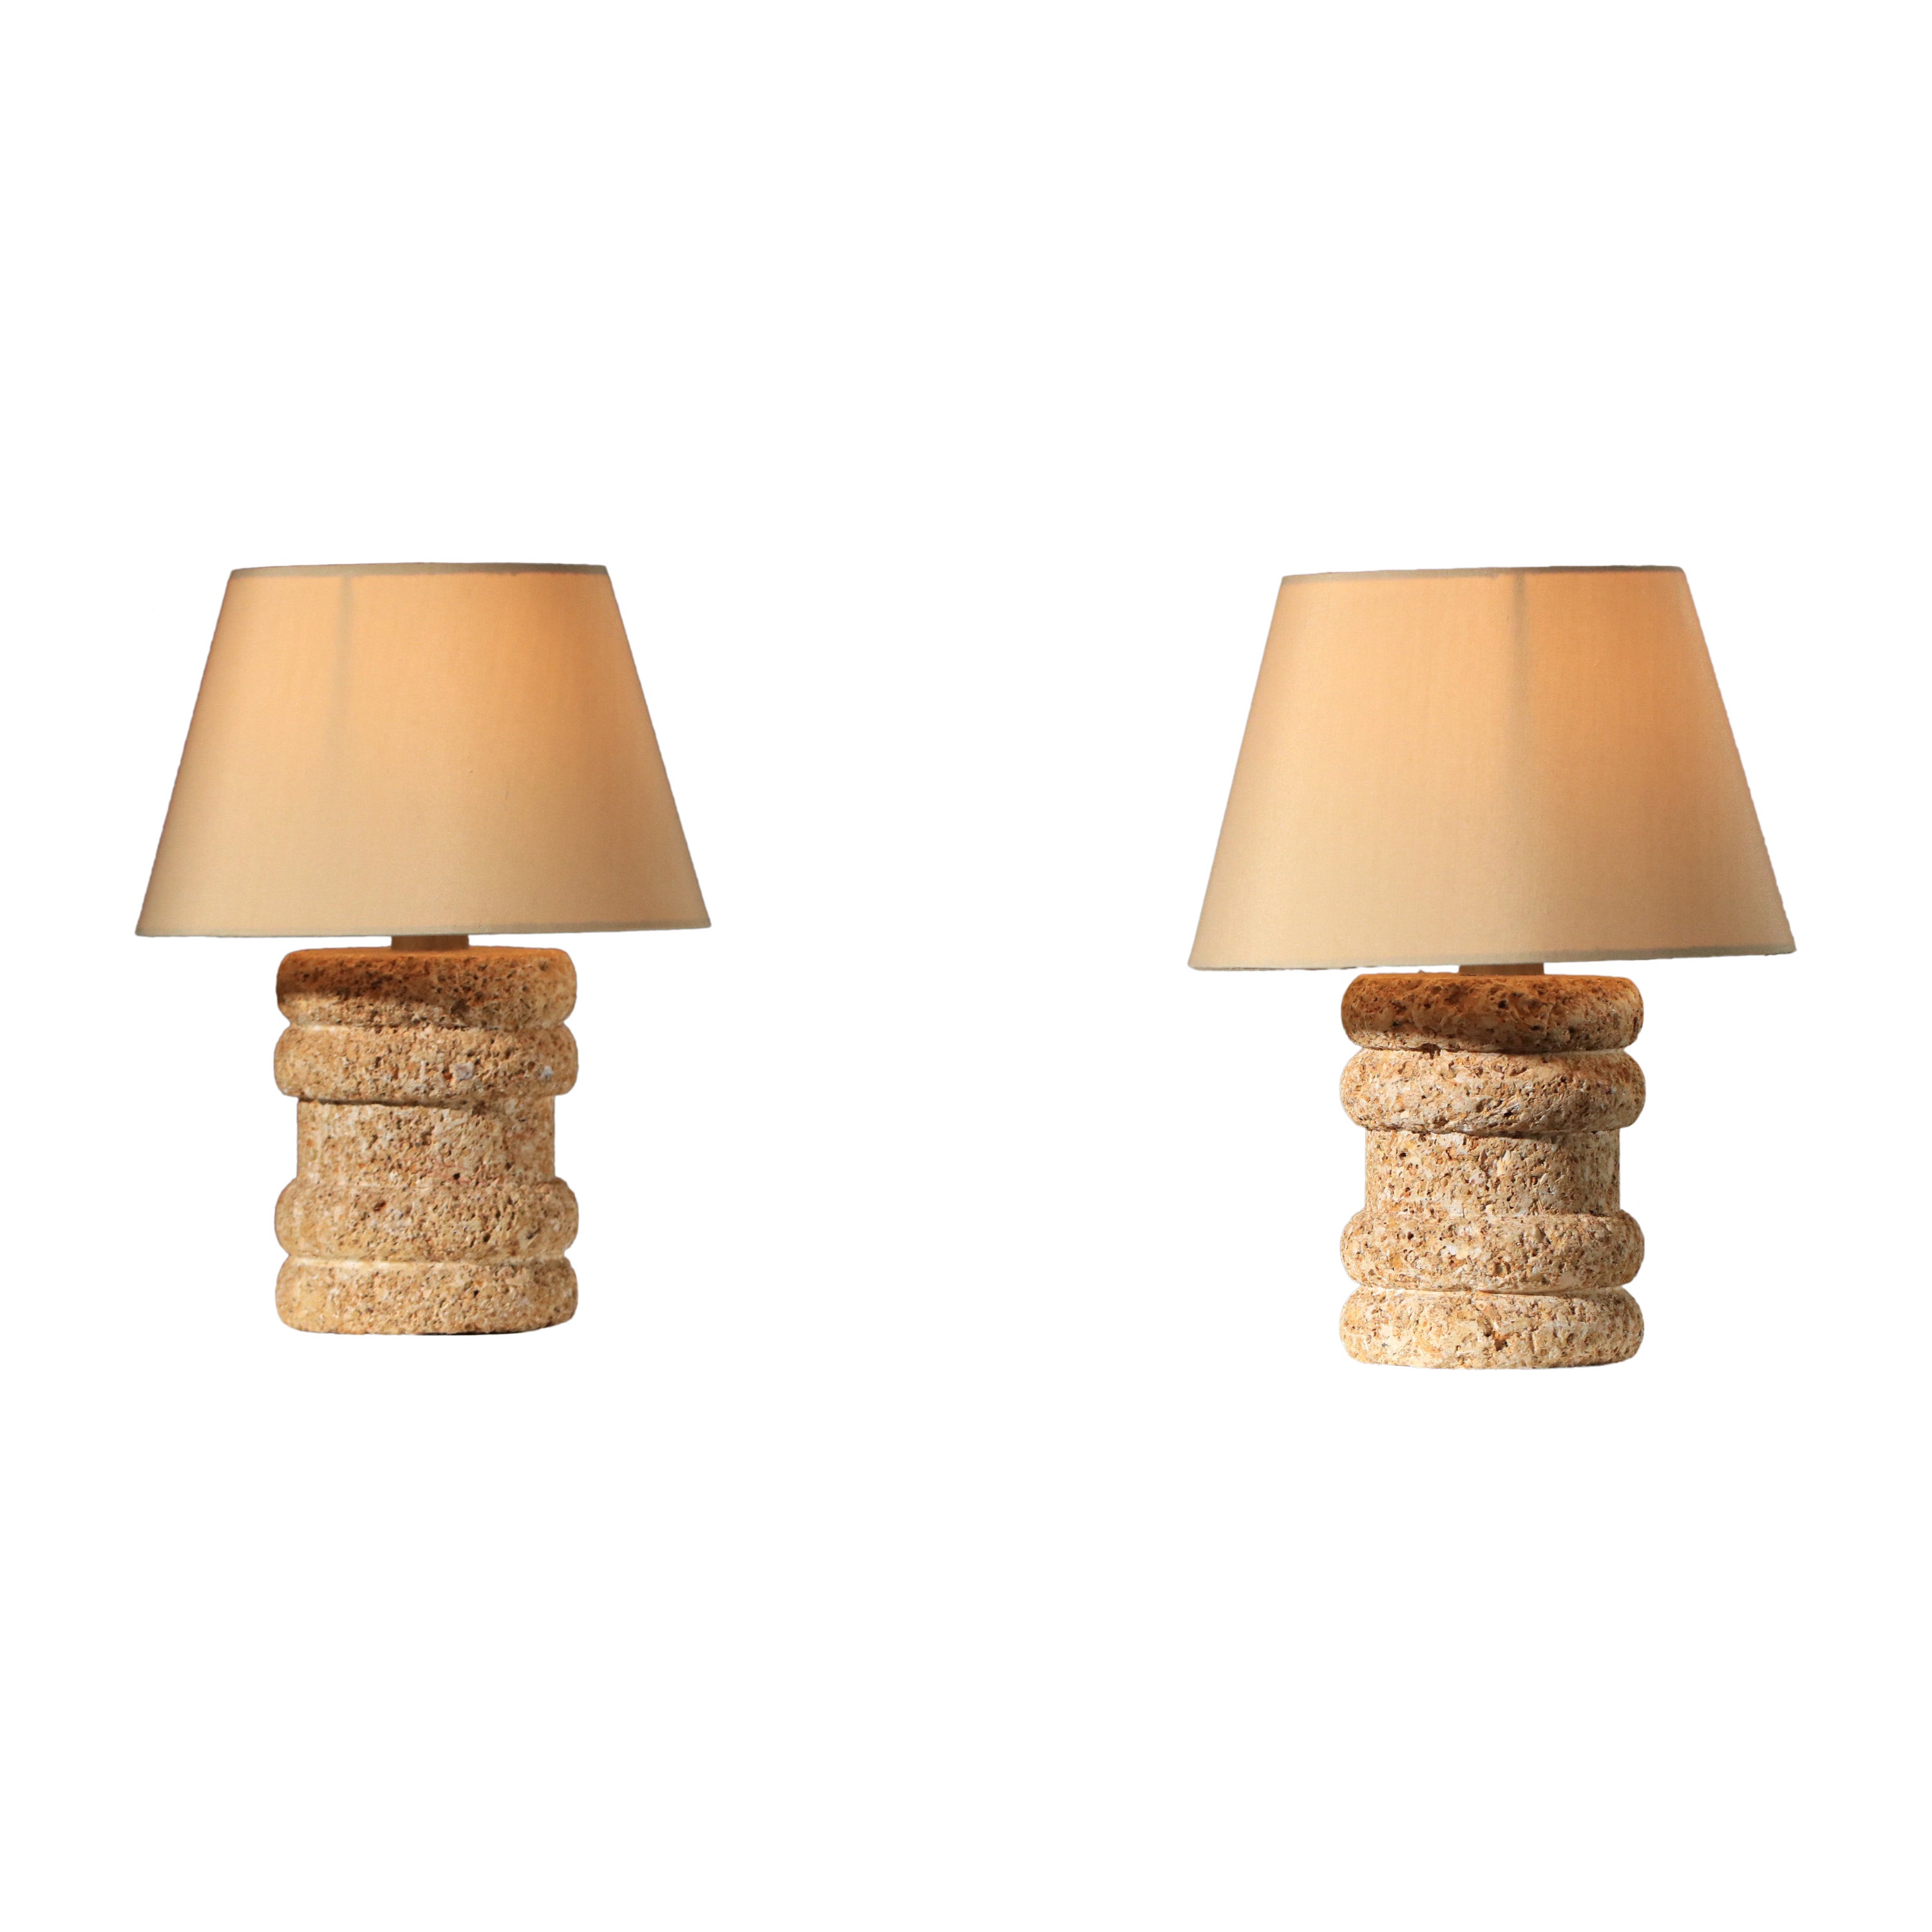 pair of Provencal stone bedside lamps in the Albert Tormos style